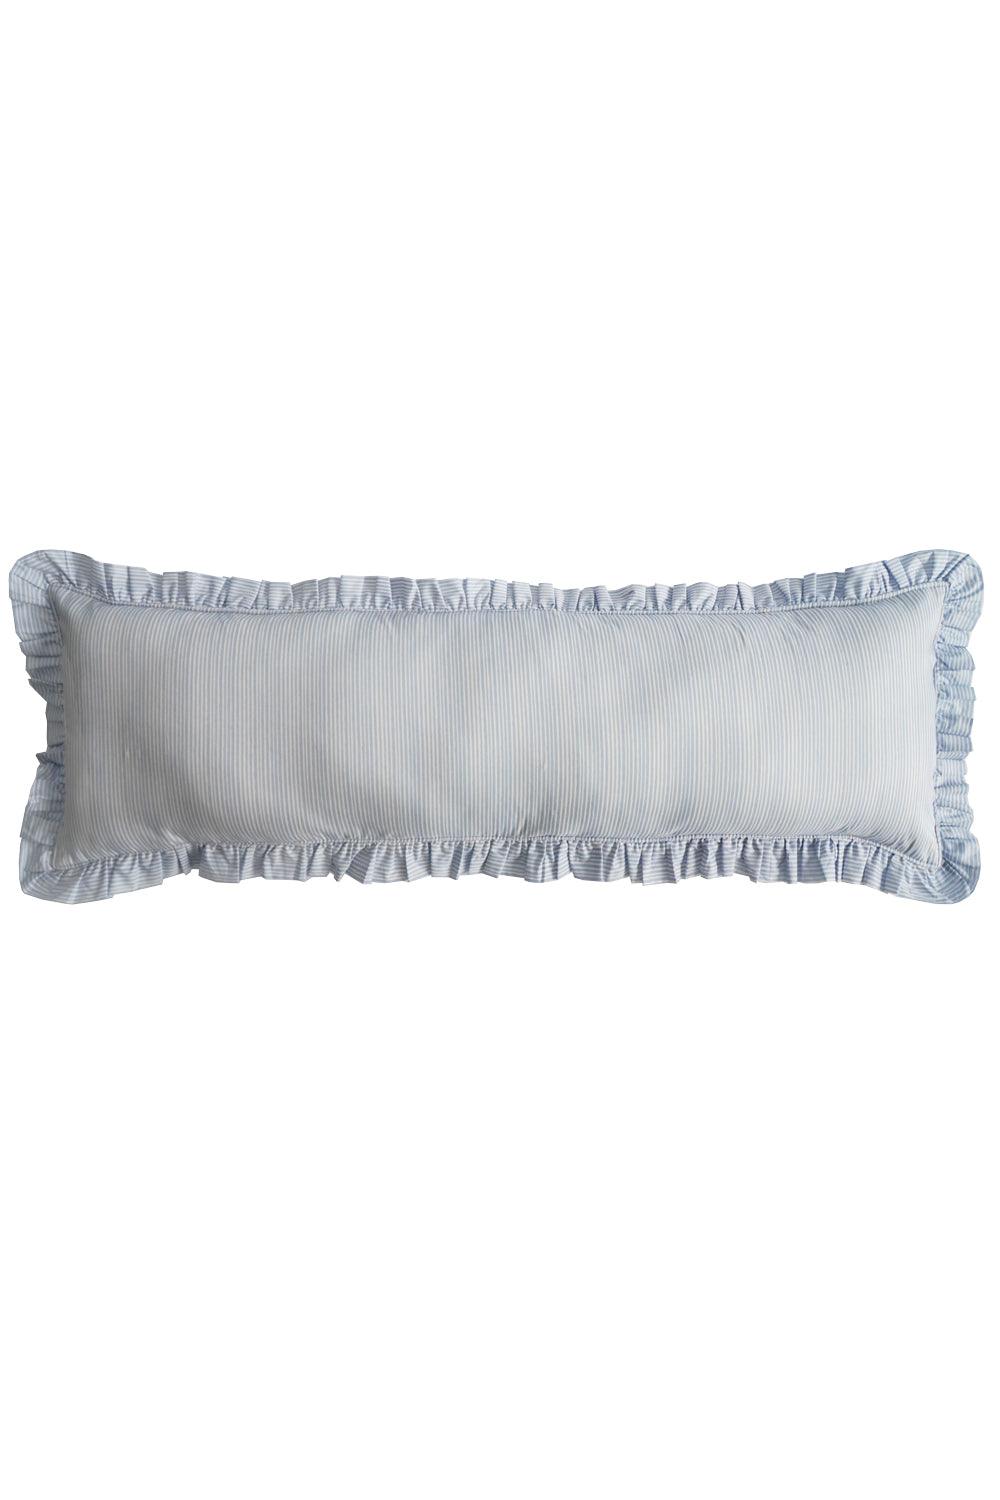 Ruffle Bolster Lumbar Cushion made with Liberty Fabric ELEMENTS BLUE - Coco & Wolf